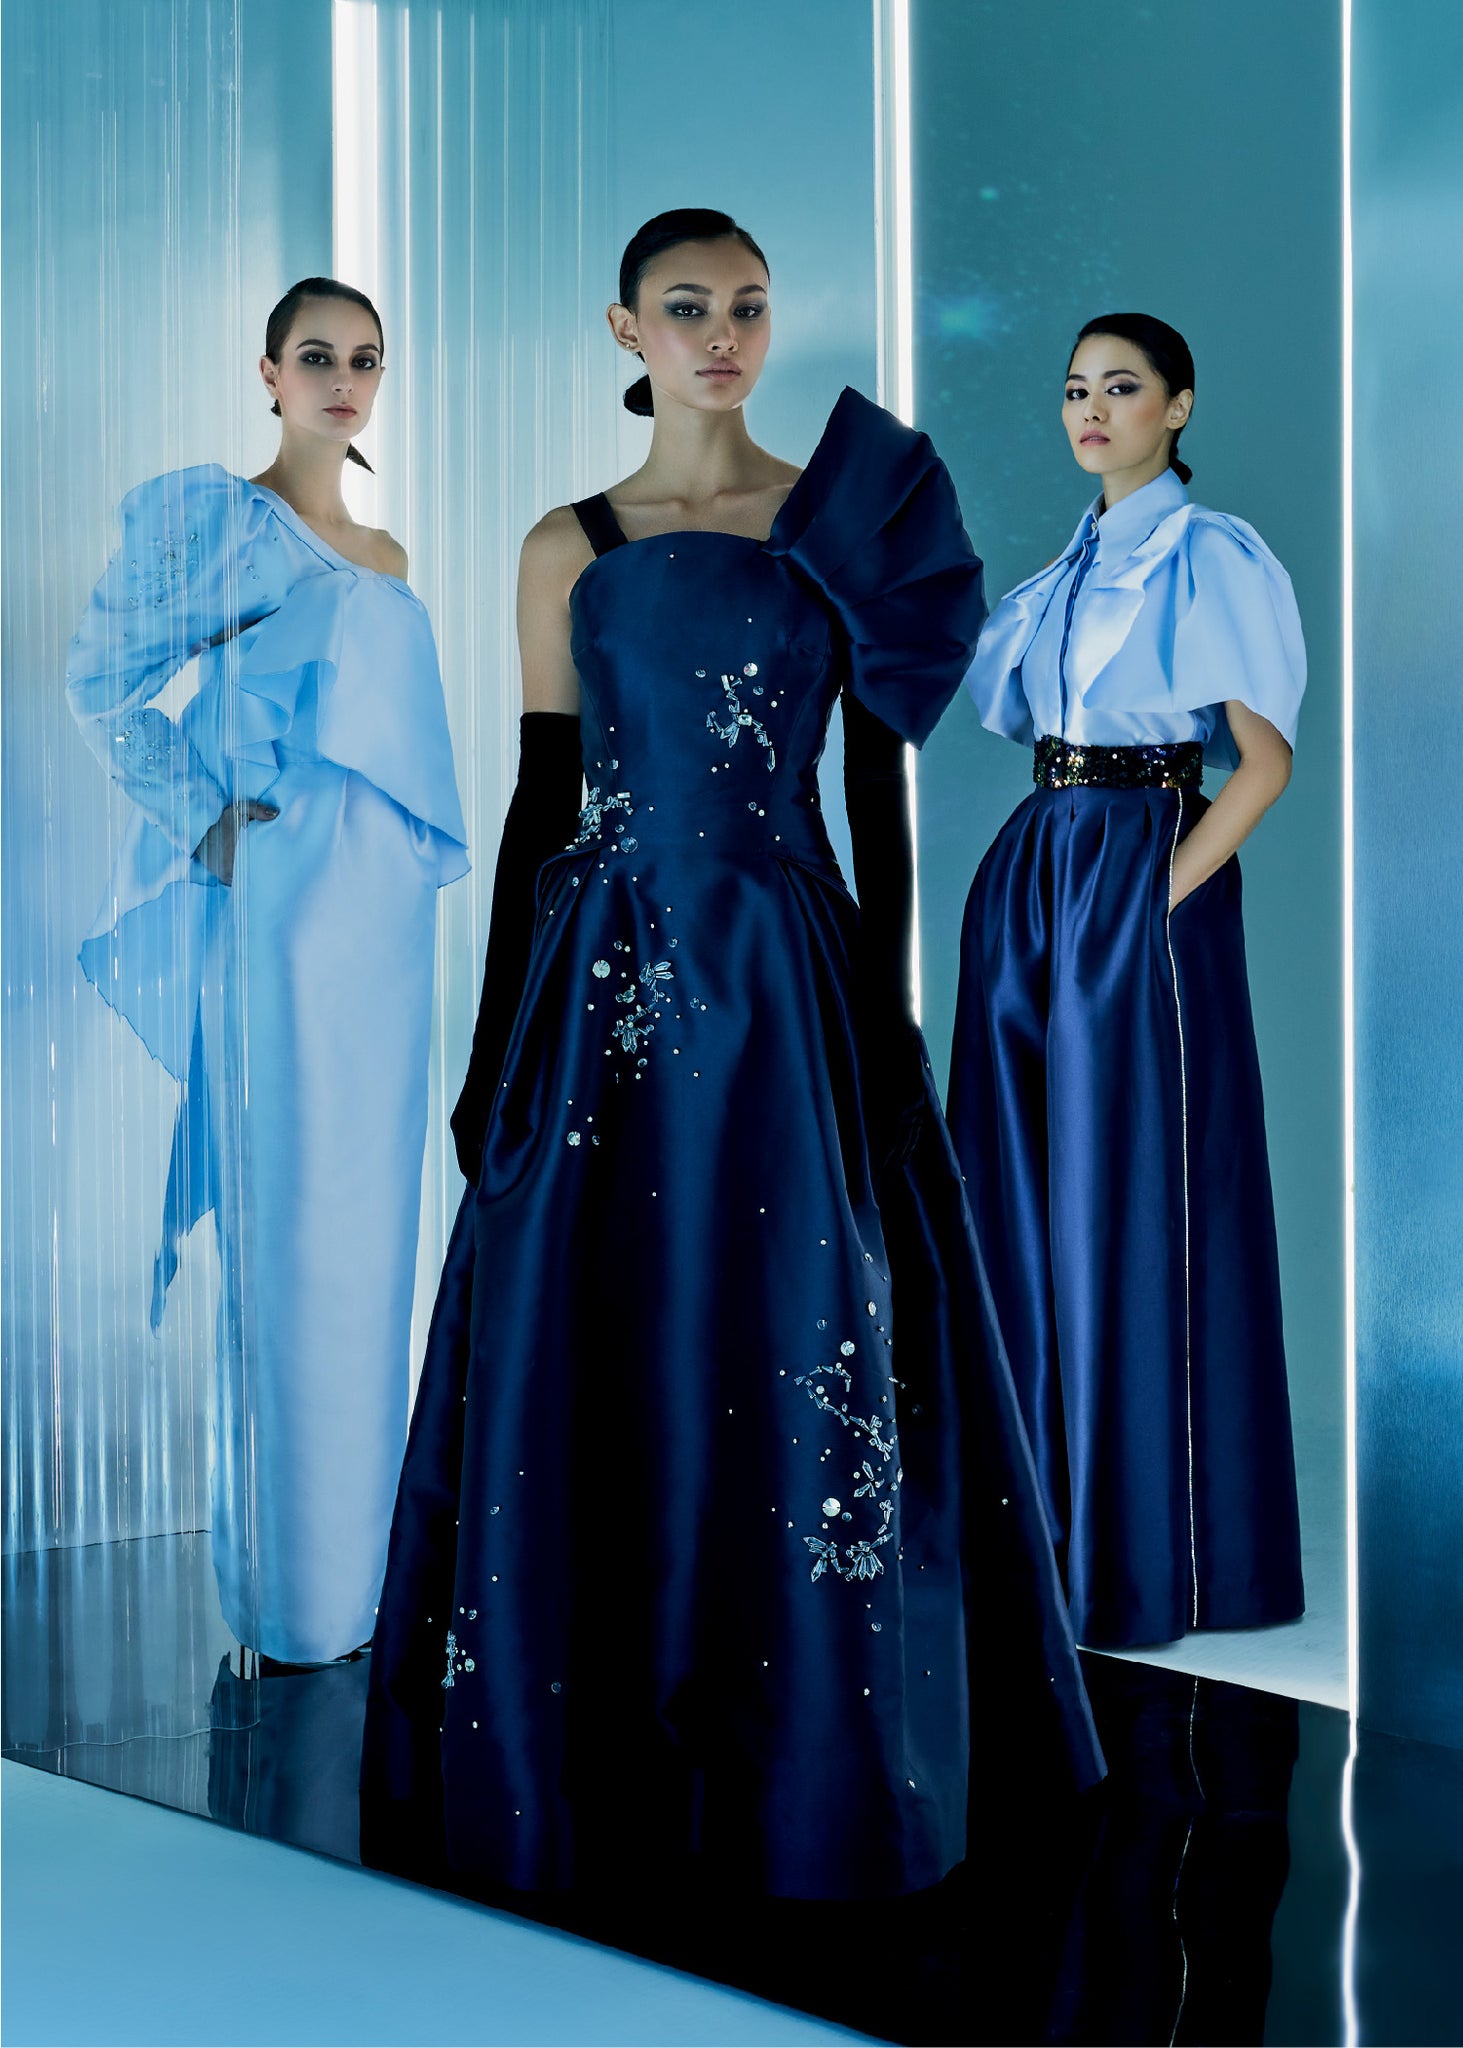 Prestige: Khoon Hooi’s futuristic Fall 2021 Collection takes inspiration from space